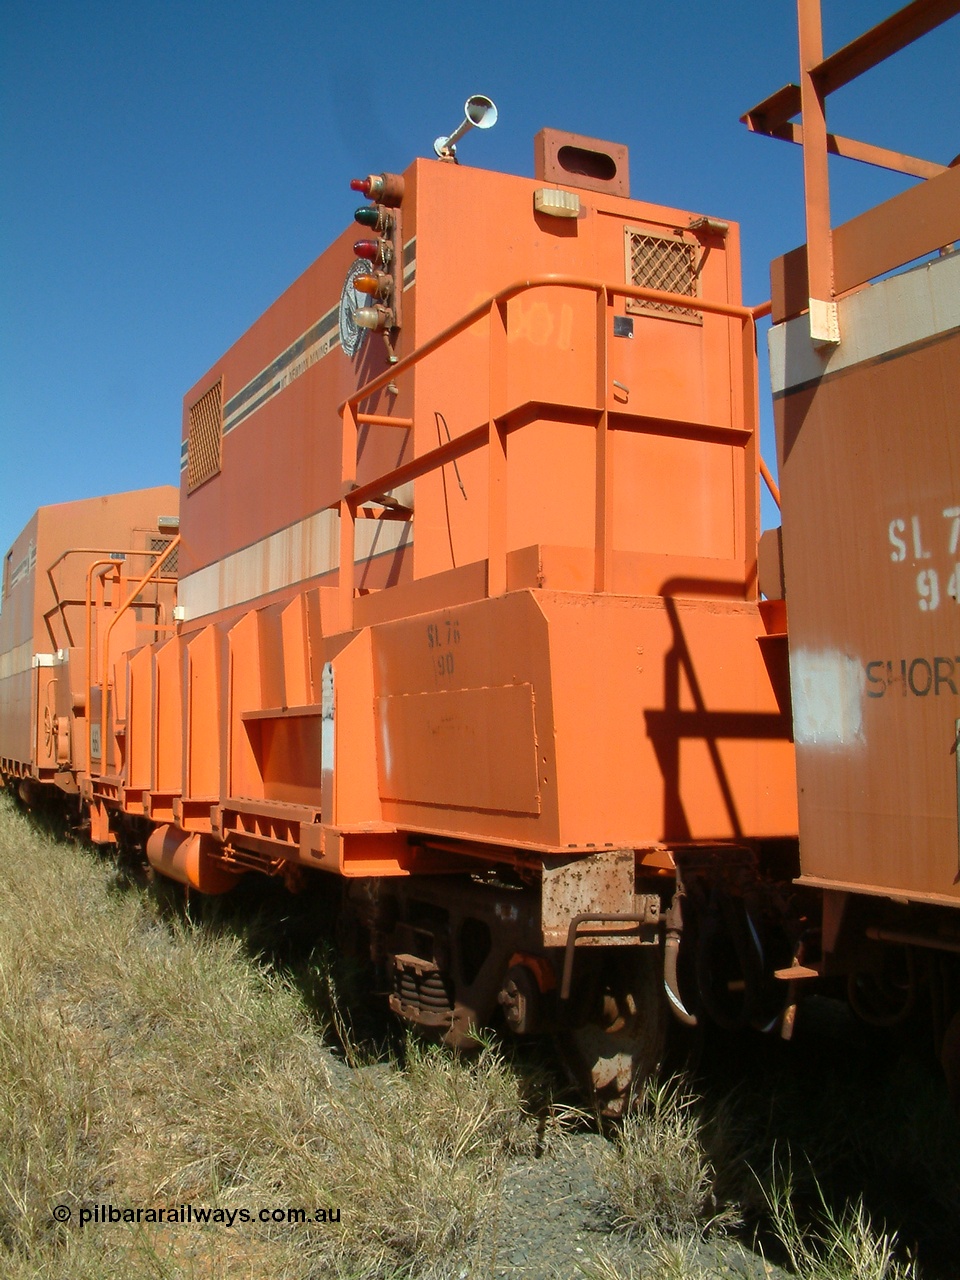 040806 102956
Flash Butt yard, heavily modified Magor USA built ex-Oroville Dam ore waggon 661, seen here modified for LocoTrol service and testing.
Keywords: Magor-USA;